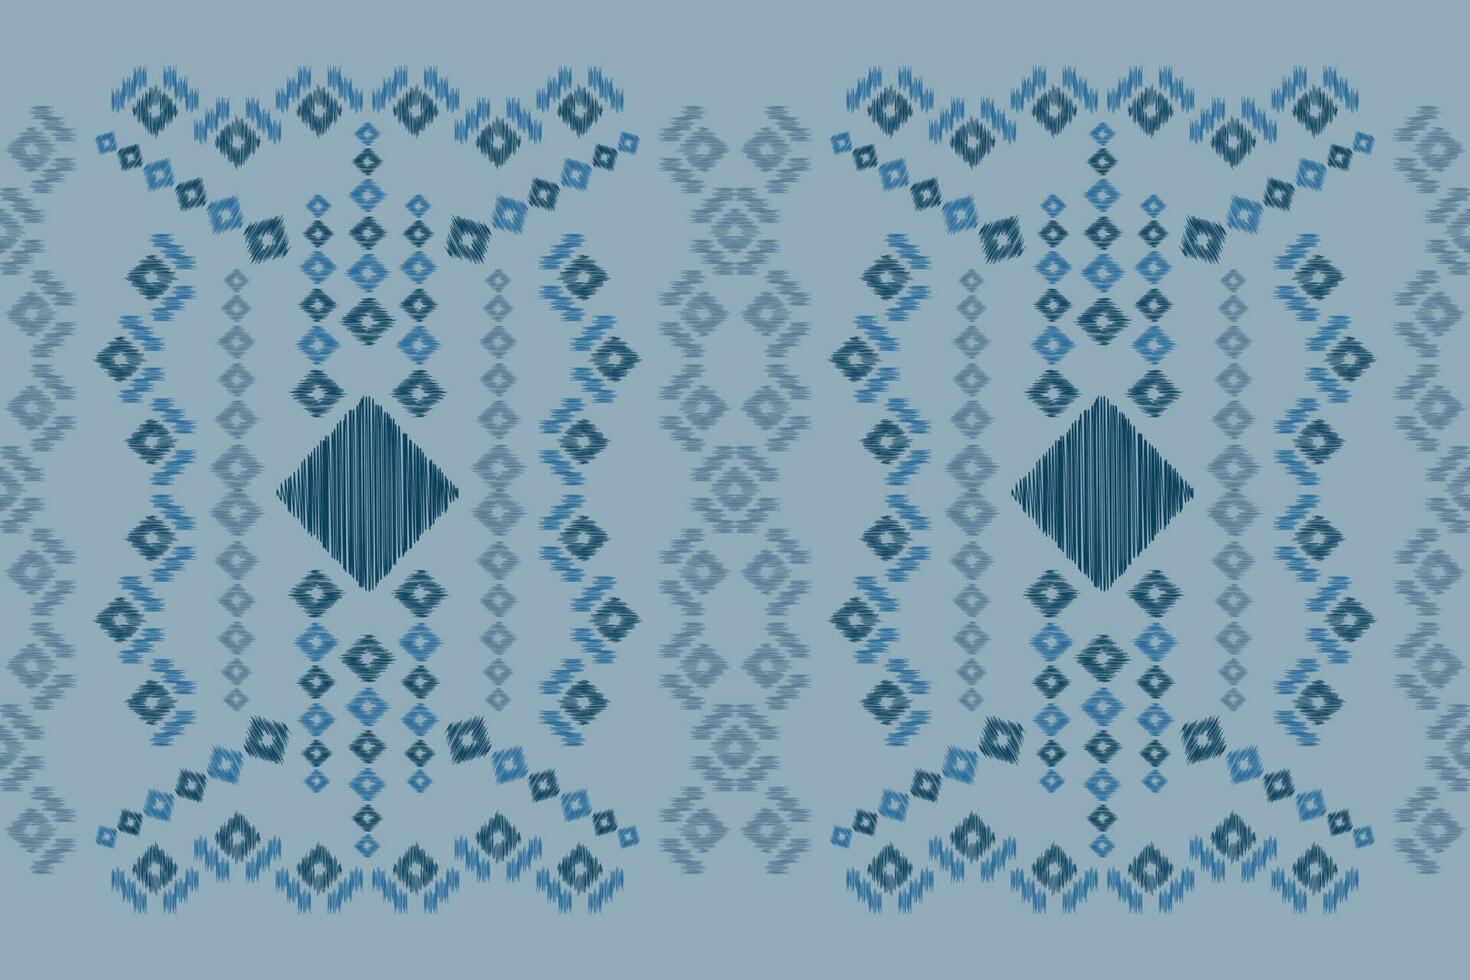 Ethnic Ikat fabric pattern geometric style.African Ikat embroidery Ethnic oriental pattern navy blue background. Abstract,vector,illustration.For texture,clothing,scraf,decoration,carpet,silk. vector